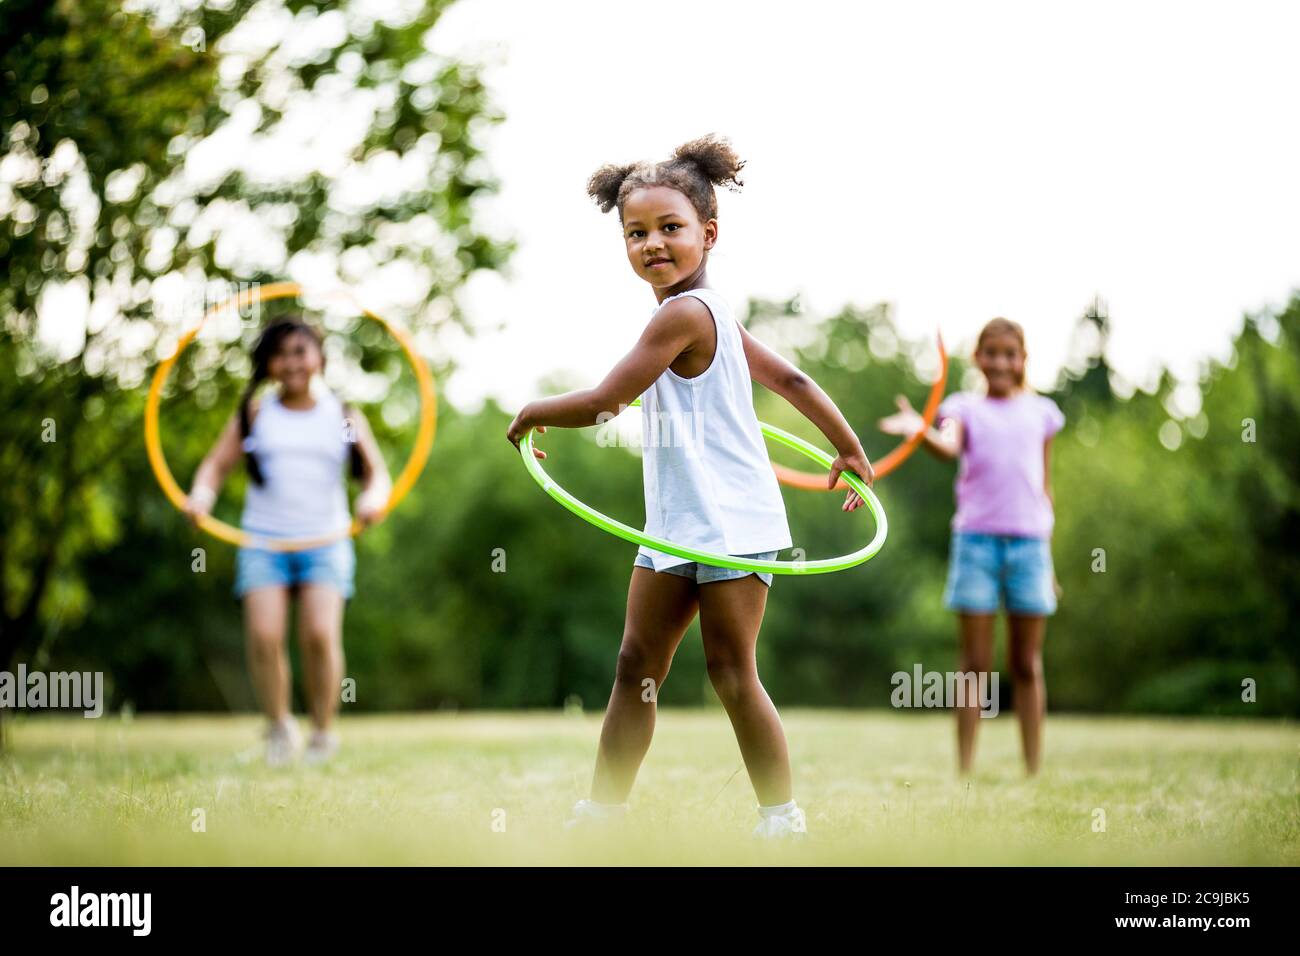 Girls playing with hula hoops in park. Stock Photo